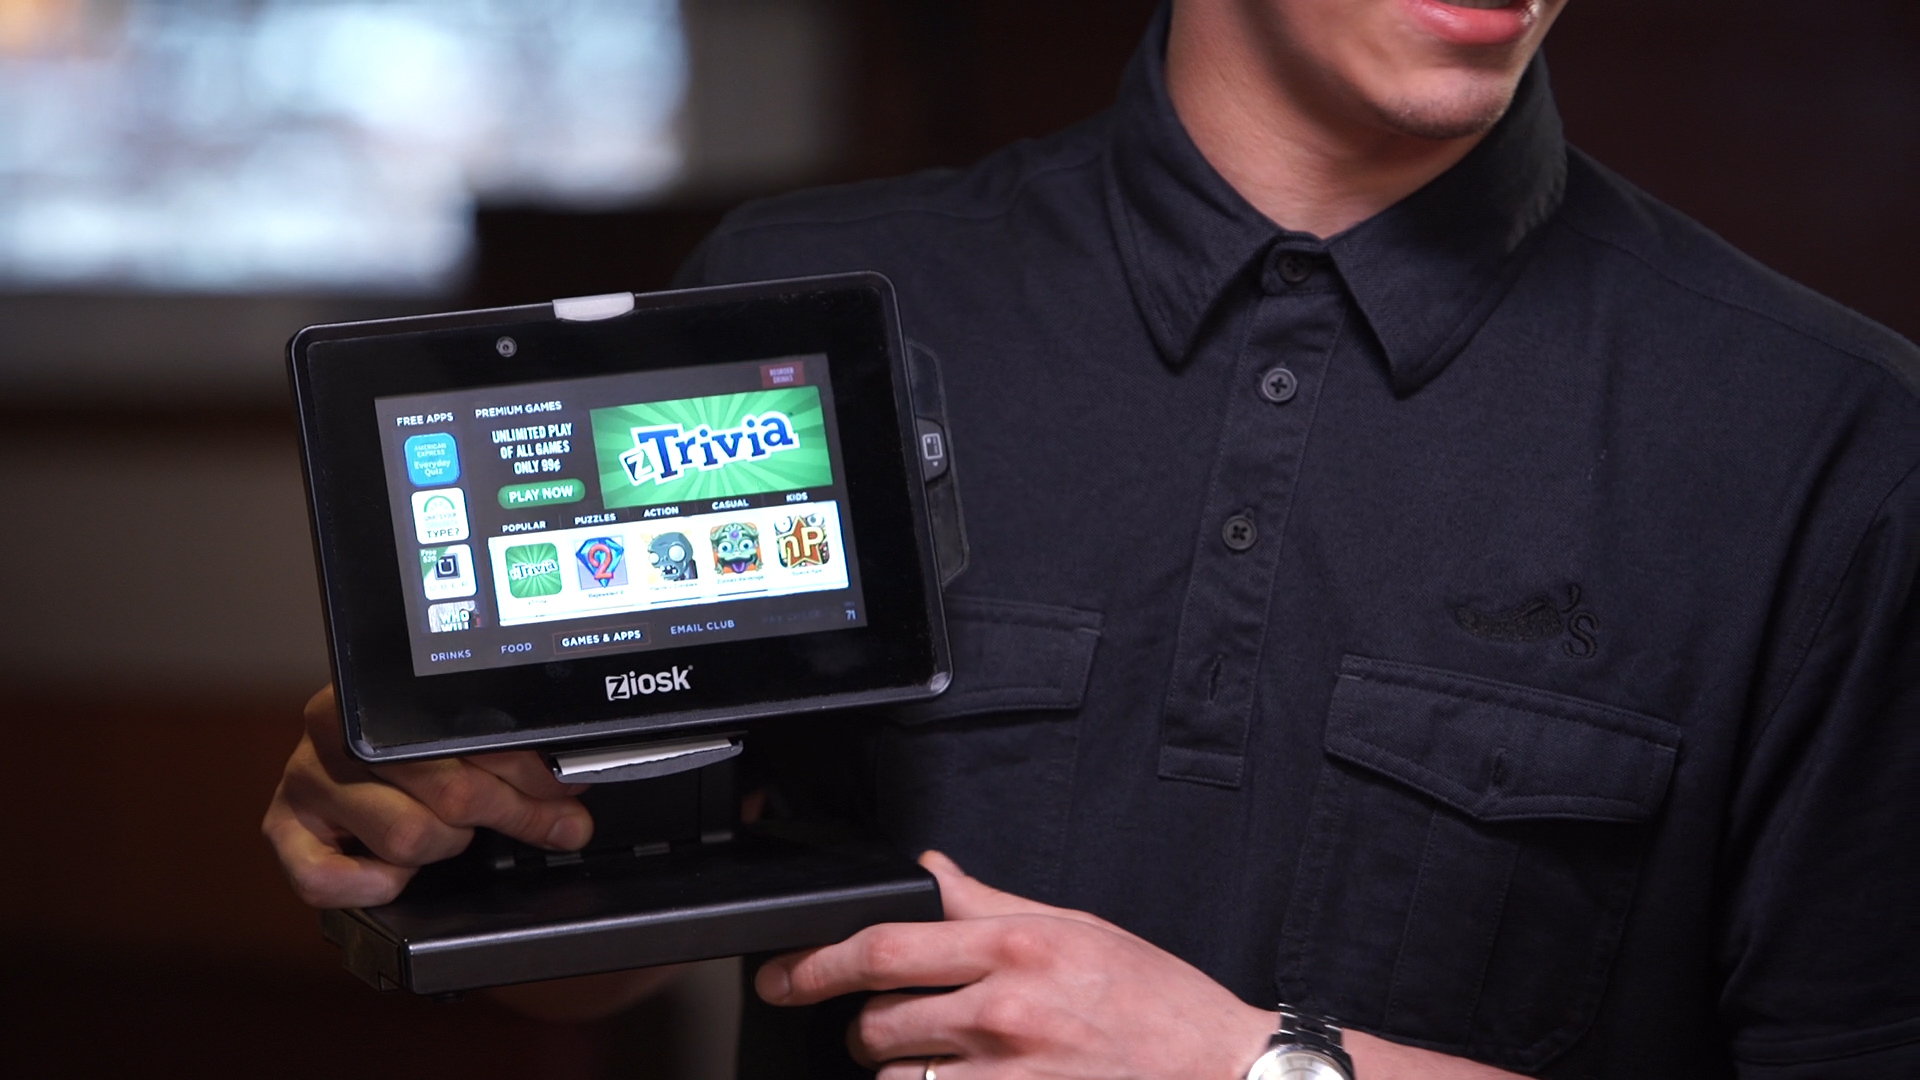 A Chili’s server holds up the Ziosk tablet to show some of the games available on it.